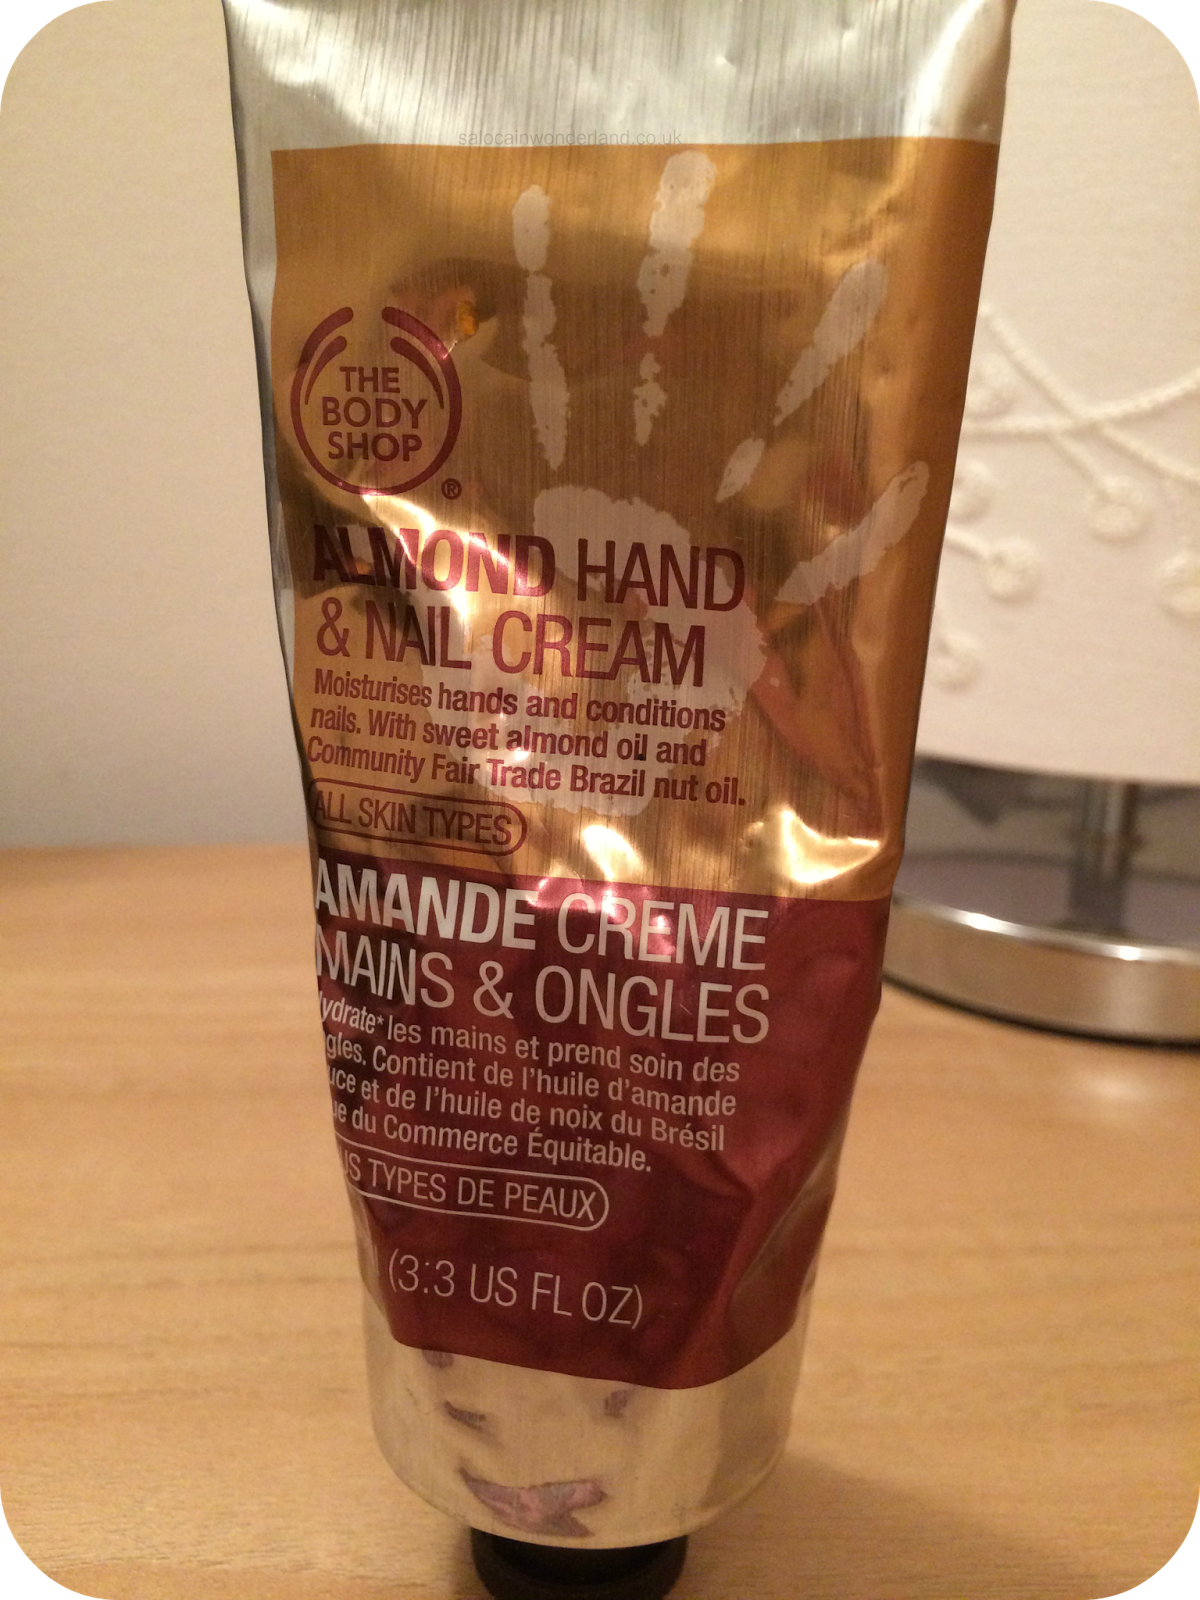 the body shop almond hand and nail cream